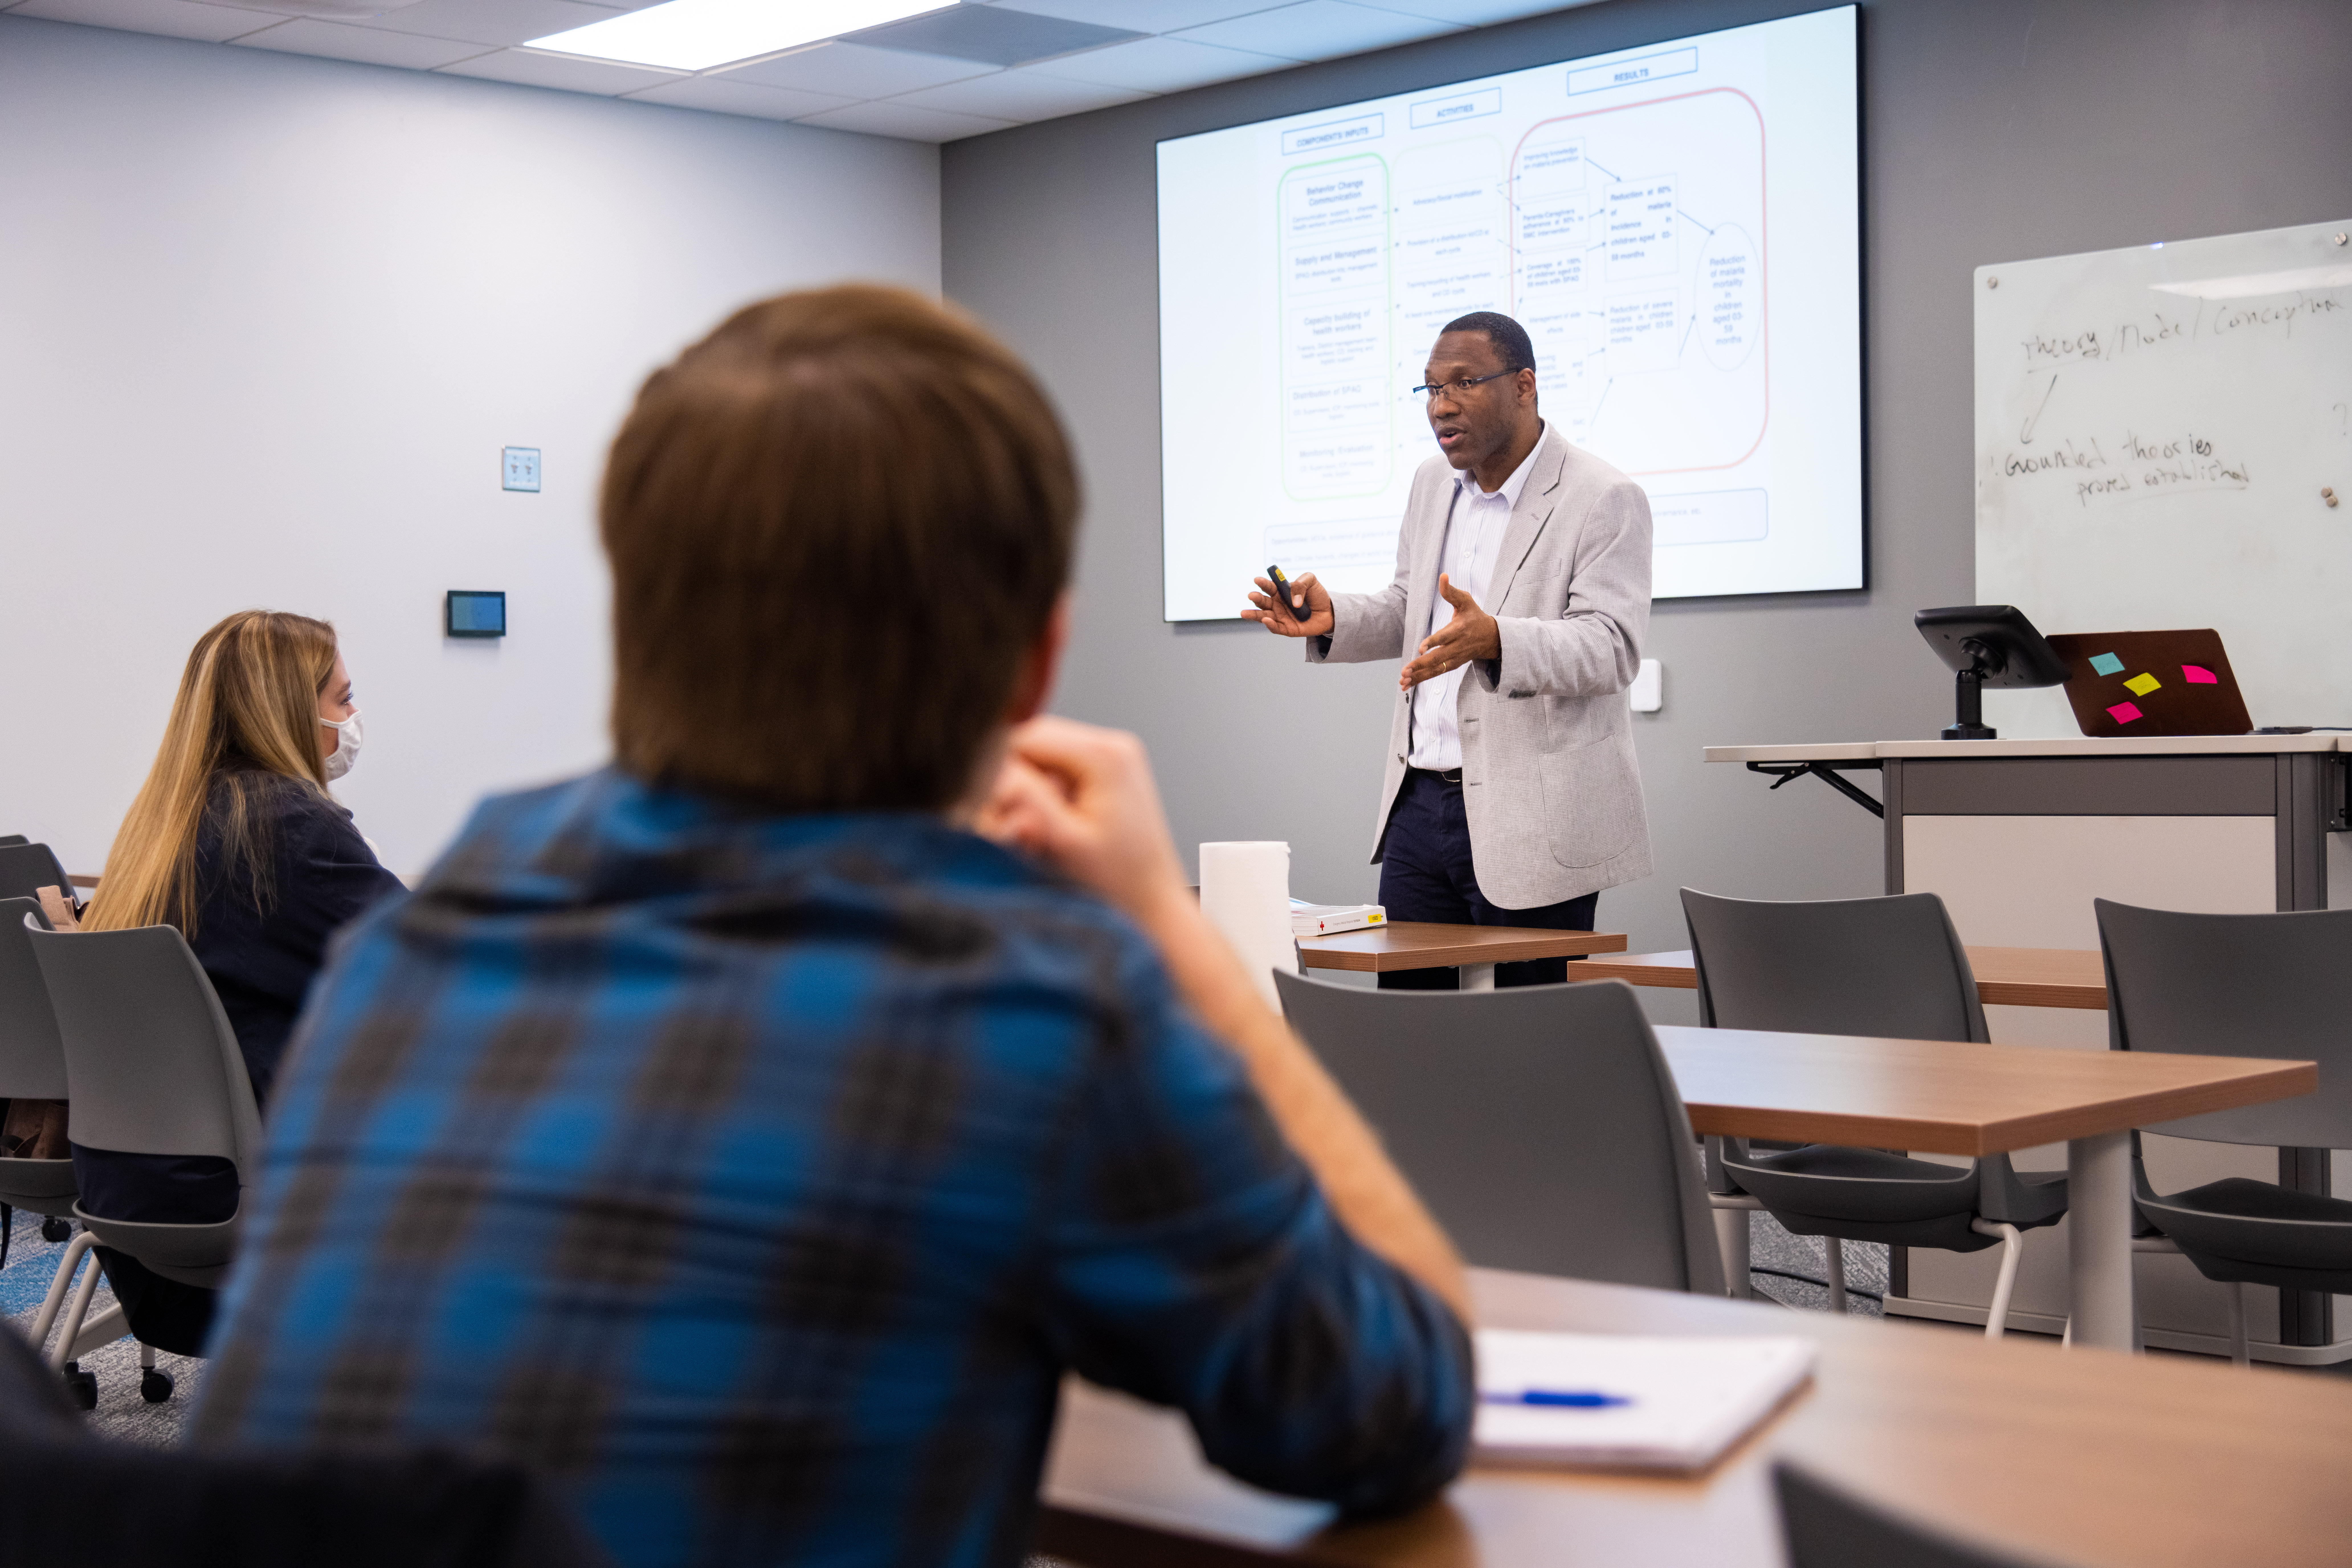 Dr. Bernard Kadio teaches health sciences classes in the School of Health of Professions wing of the Mack Building